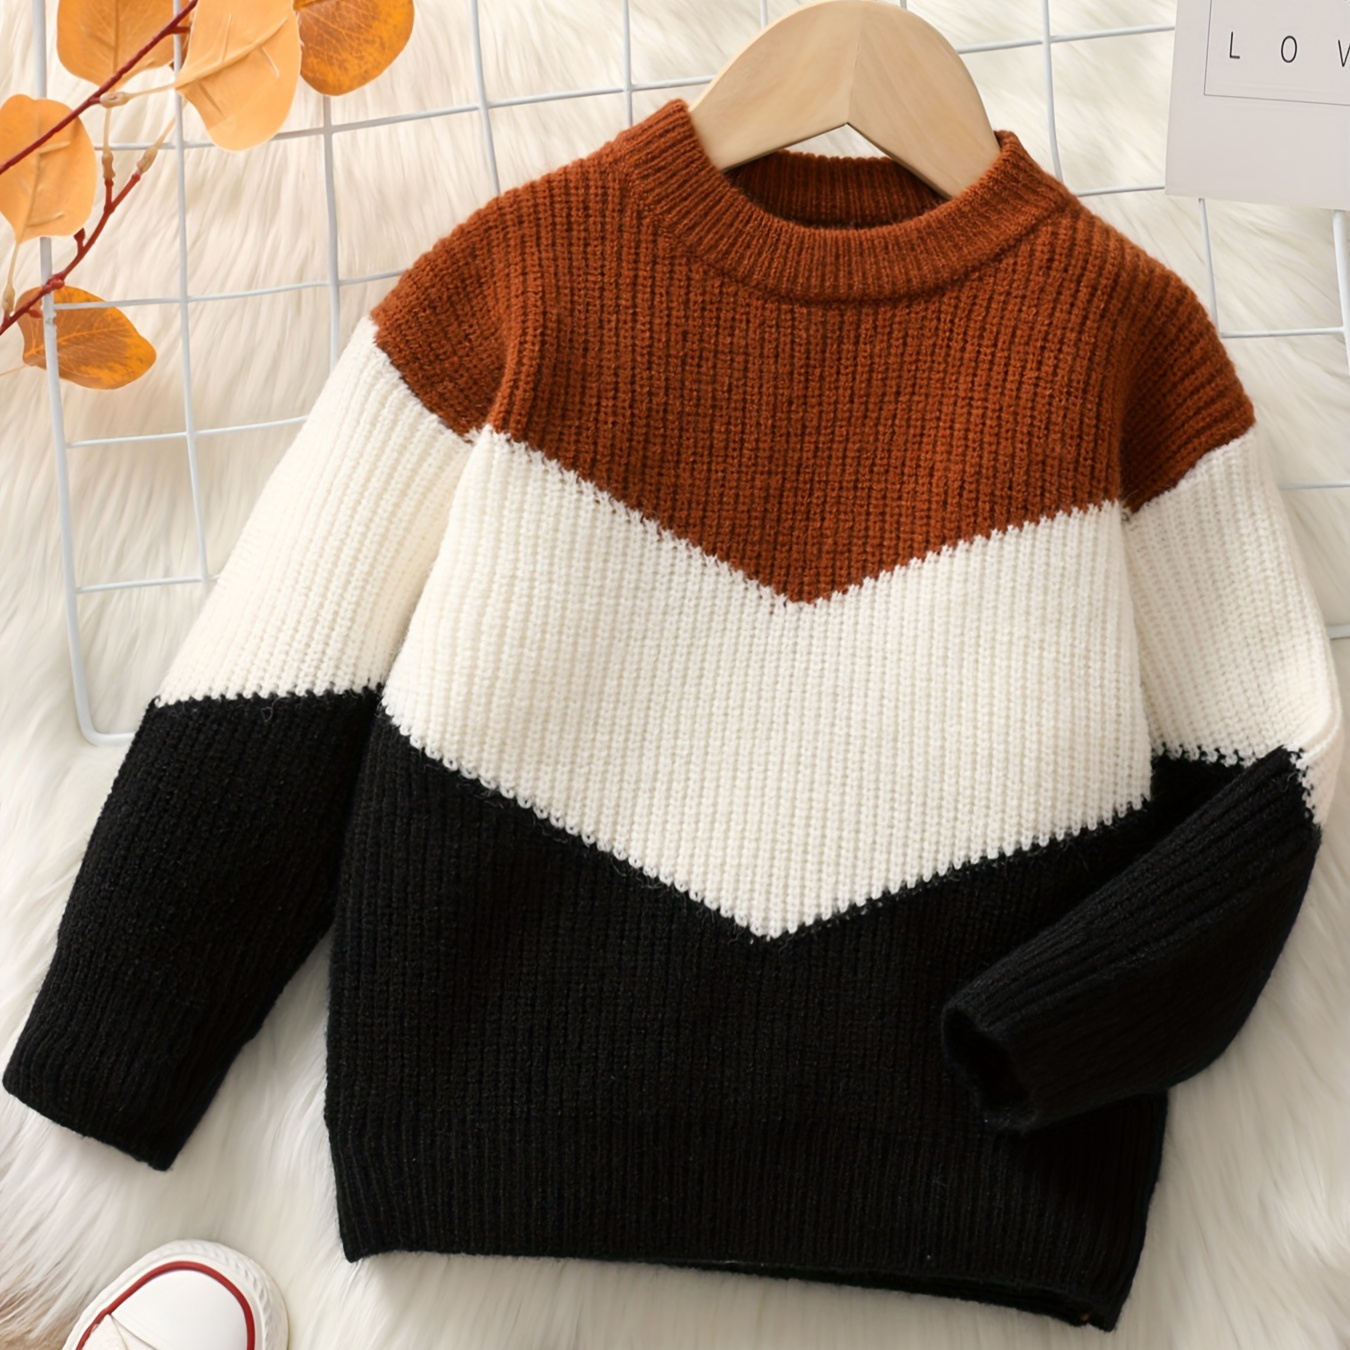 

Boys Sweater Kids Winter Boy Warm Pullovers Outerwear Children Toddler Colorblock O-neck Knitted Sweater Tops